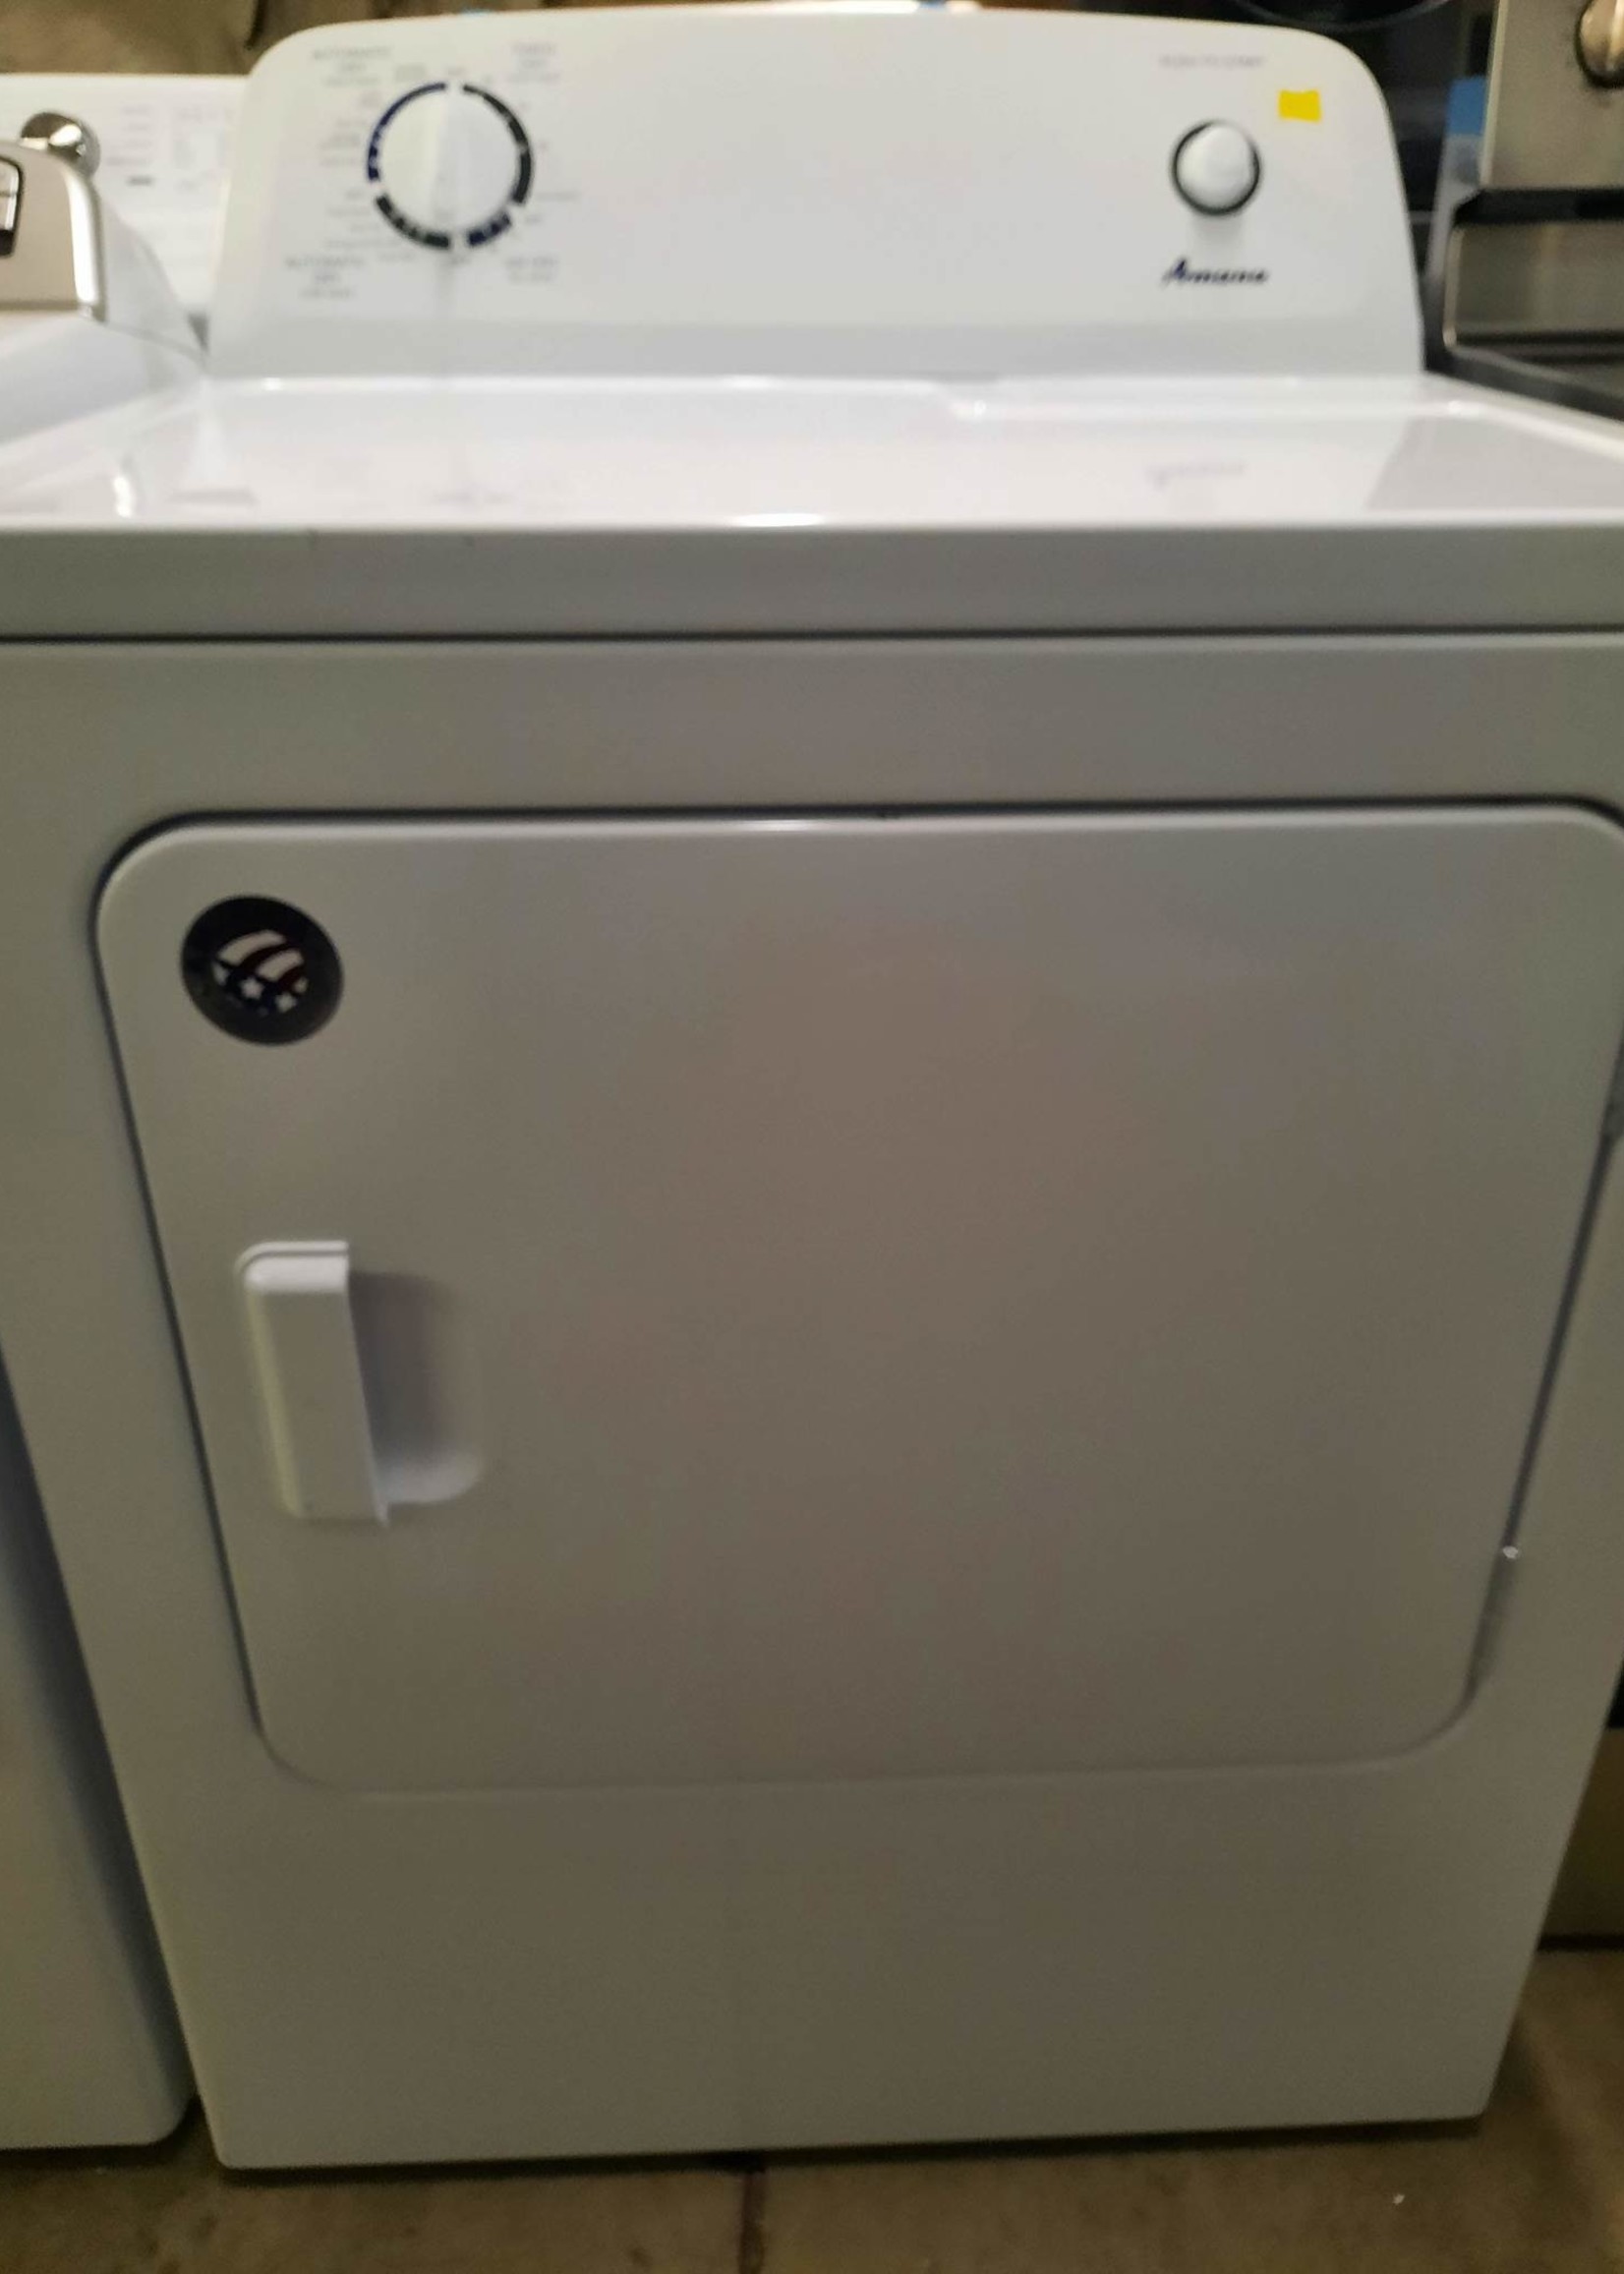 Amana *Amana NED4655EW 6.5 Cu. Ft. Electric Dryer with Automatic Dryness Control - White